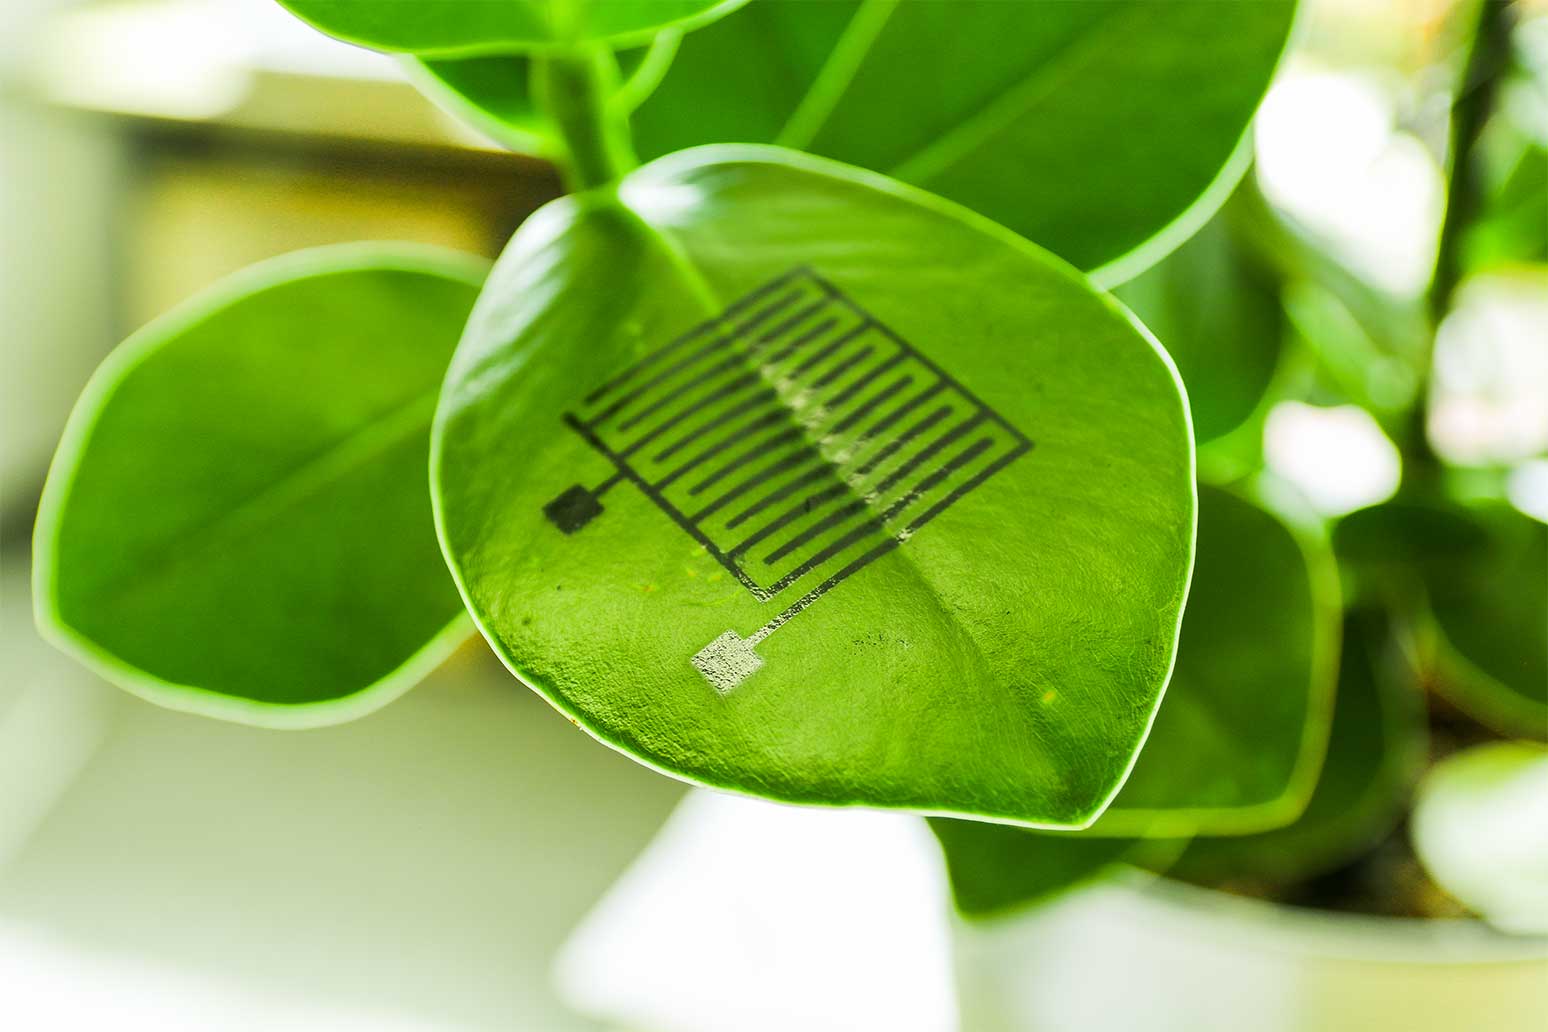 Sensors based on organic semiconductors enable monitoring of plant vitality and serve as indicators of parasitic infestation